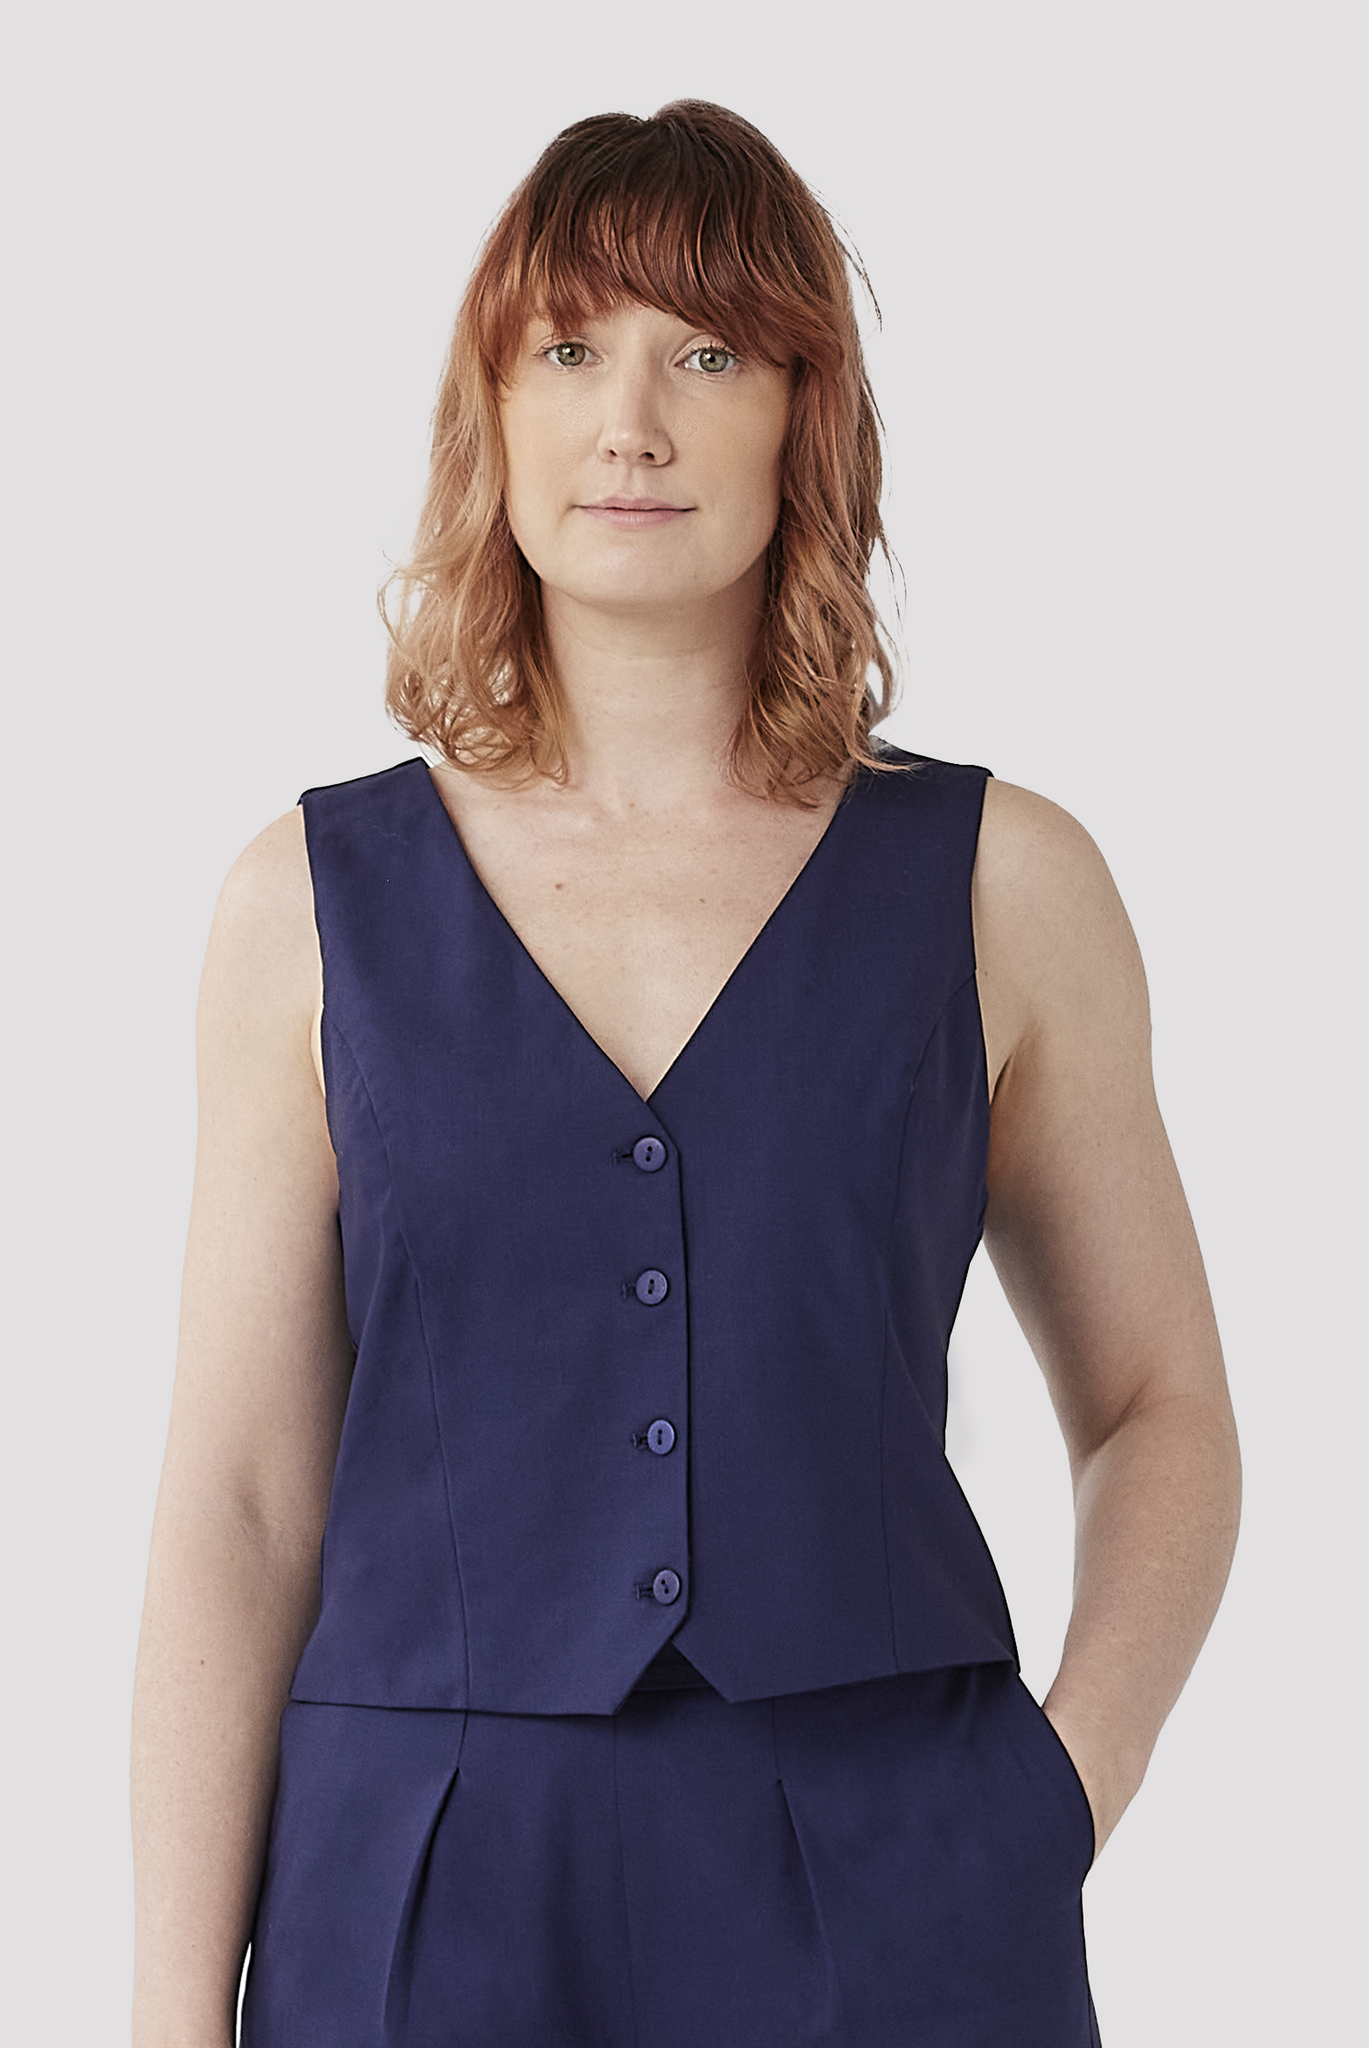 The Wool Vest by Aam is a chic, slightly cropped vest designed to flatter women with full hips and thighs. Featuring an elegant v-neck, tone-on-tone buttons and a slimming silhouette through the waist. Available in four colors, including the vibrant indigo shade shown in this photograph.